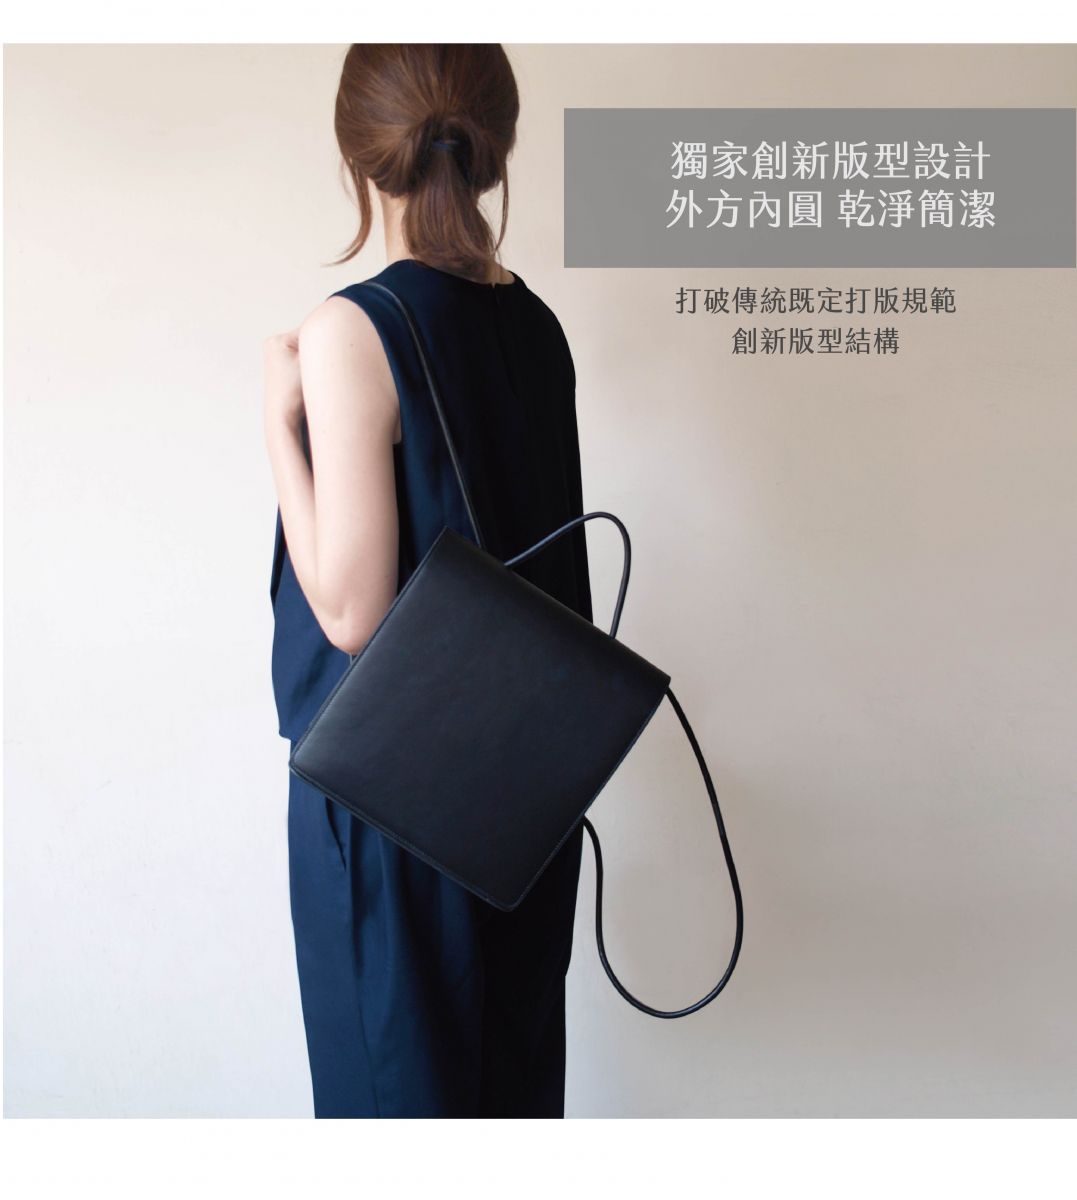 Dictionary Backpack 字典後背包